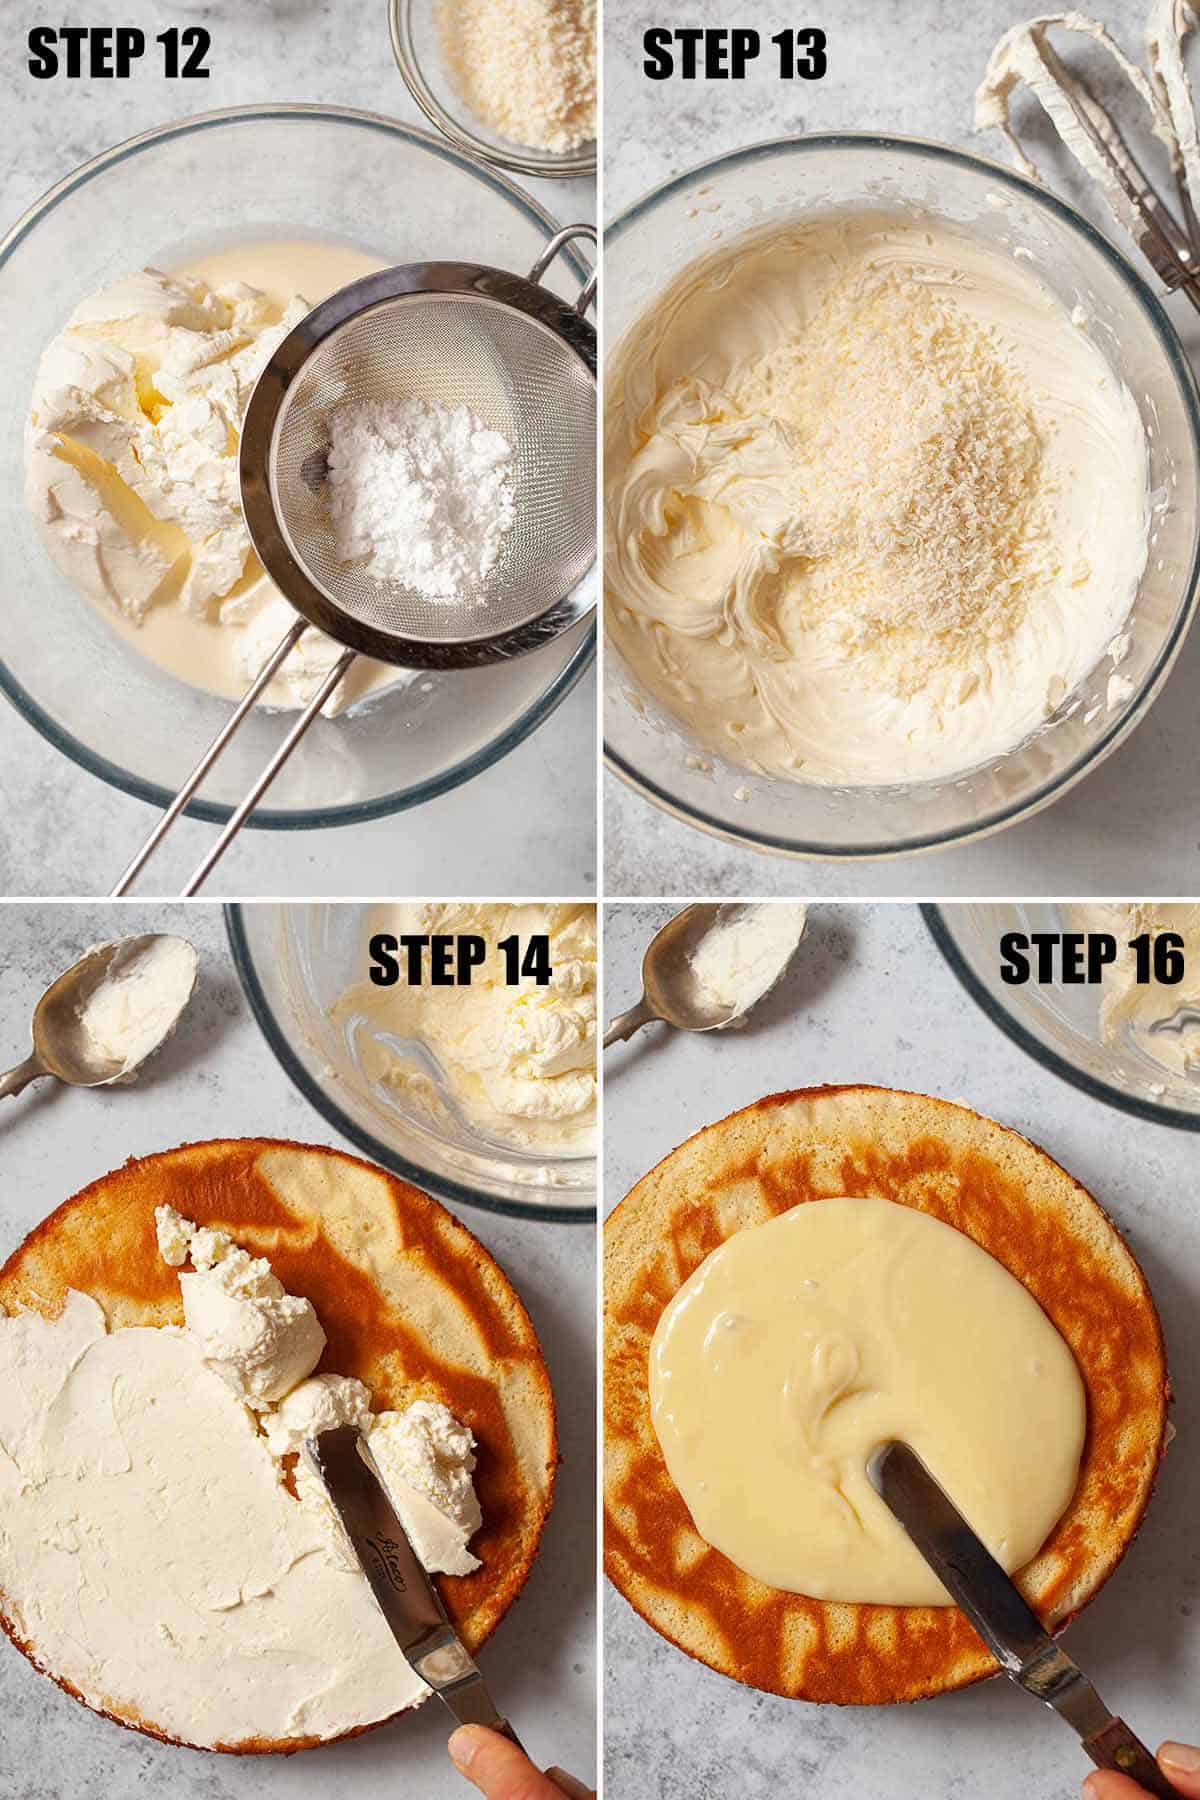 Collage of images showing a Raffaello cake being assembled.